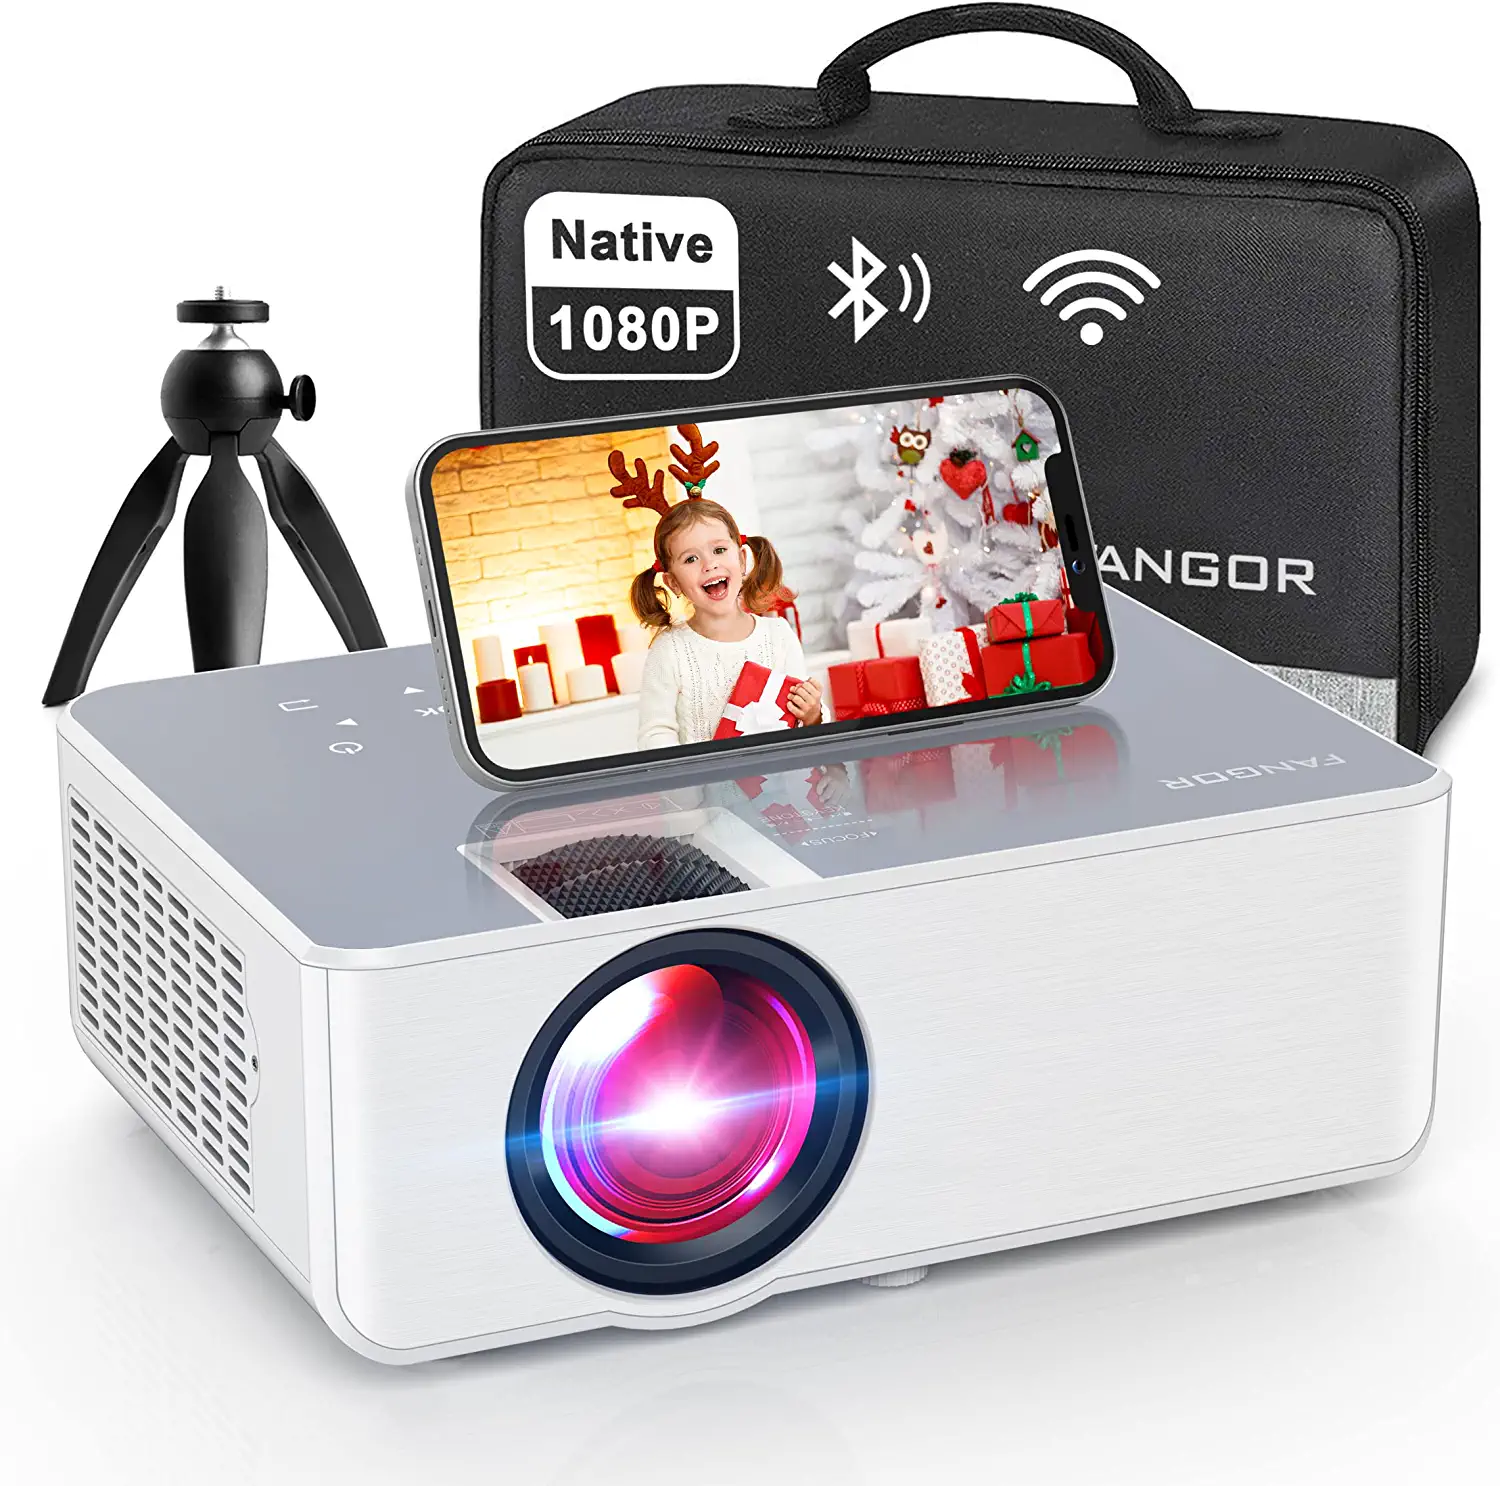 1080P HD Projector, WiFi Projector Bluetooth Projector, FANGOR 230 Portable Movie Projector with Tripod